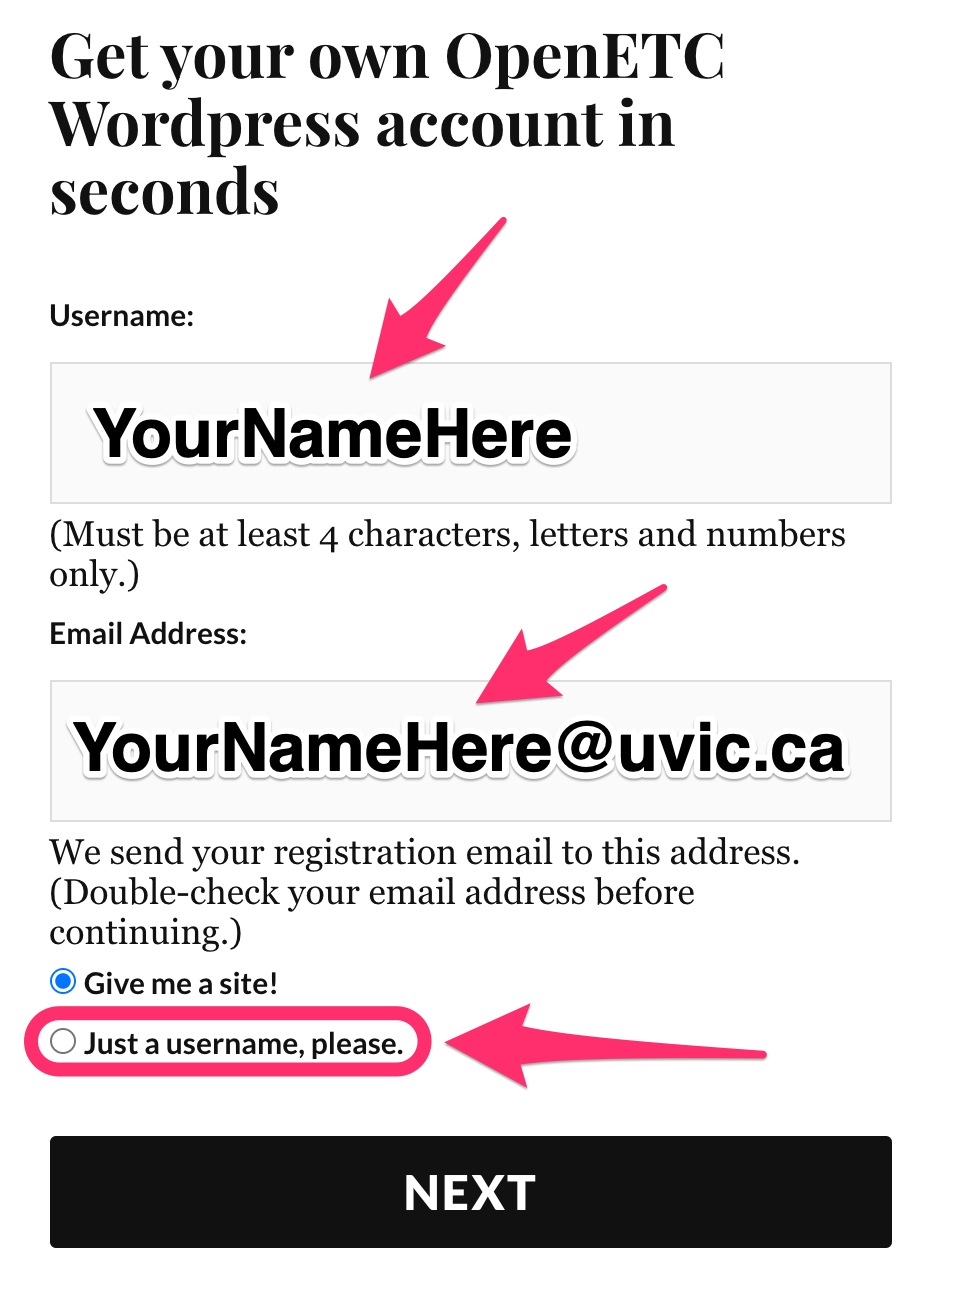 Completing the form with username and uvic email